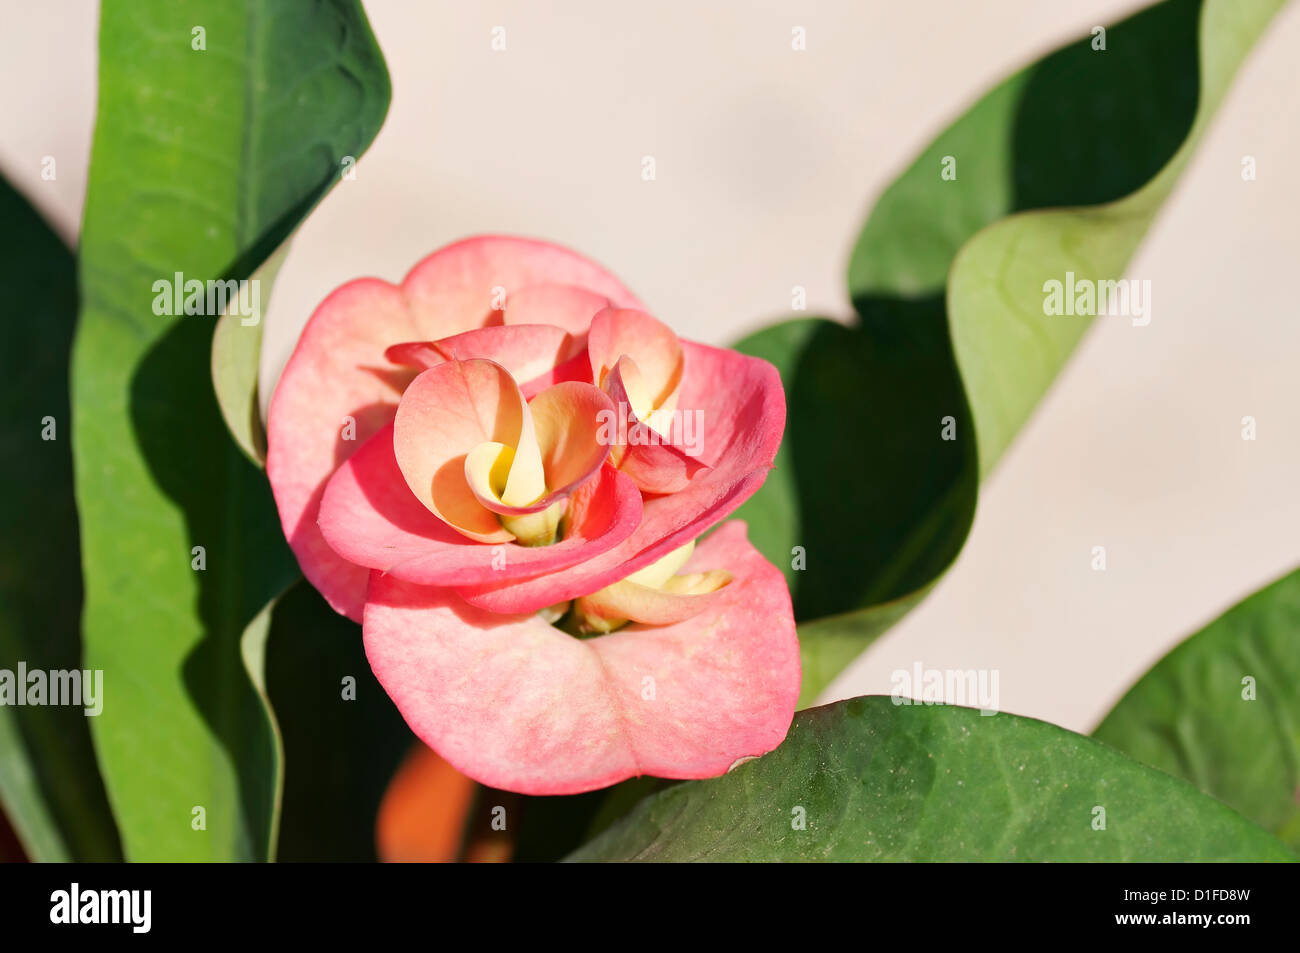 Closeup view of flowering blossom on 'Crown of Thorns' succulent plant, also known as the Christ plant. Stock Photo